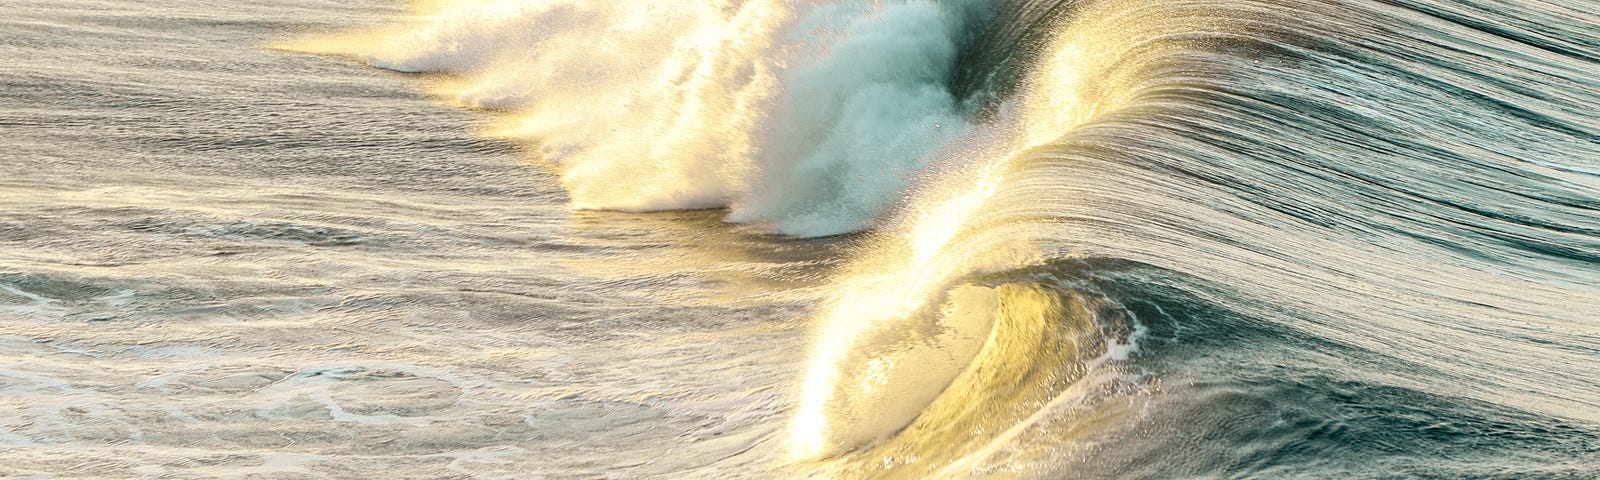 A cresting wave just about to break, shining in the sun